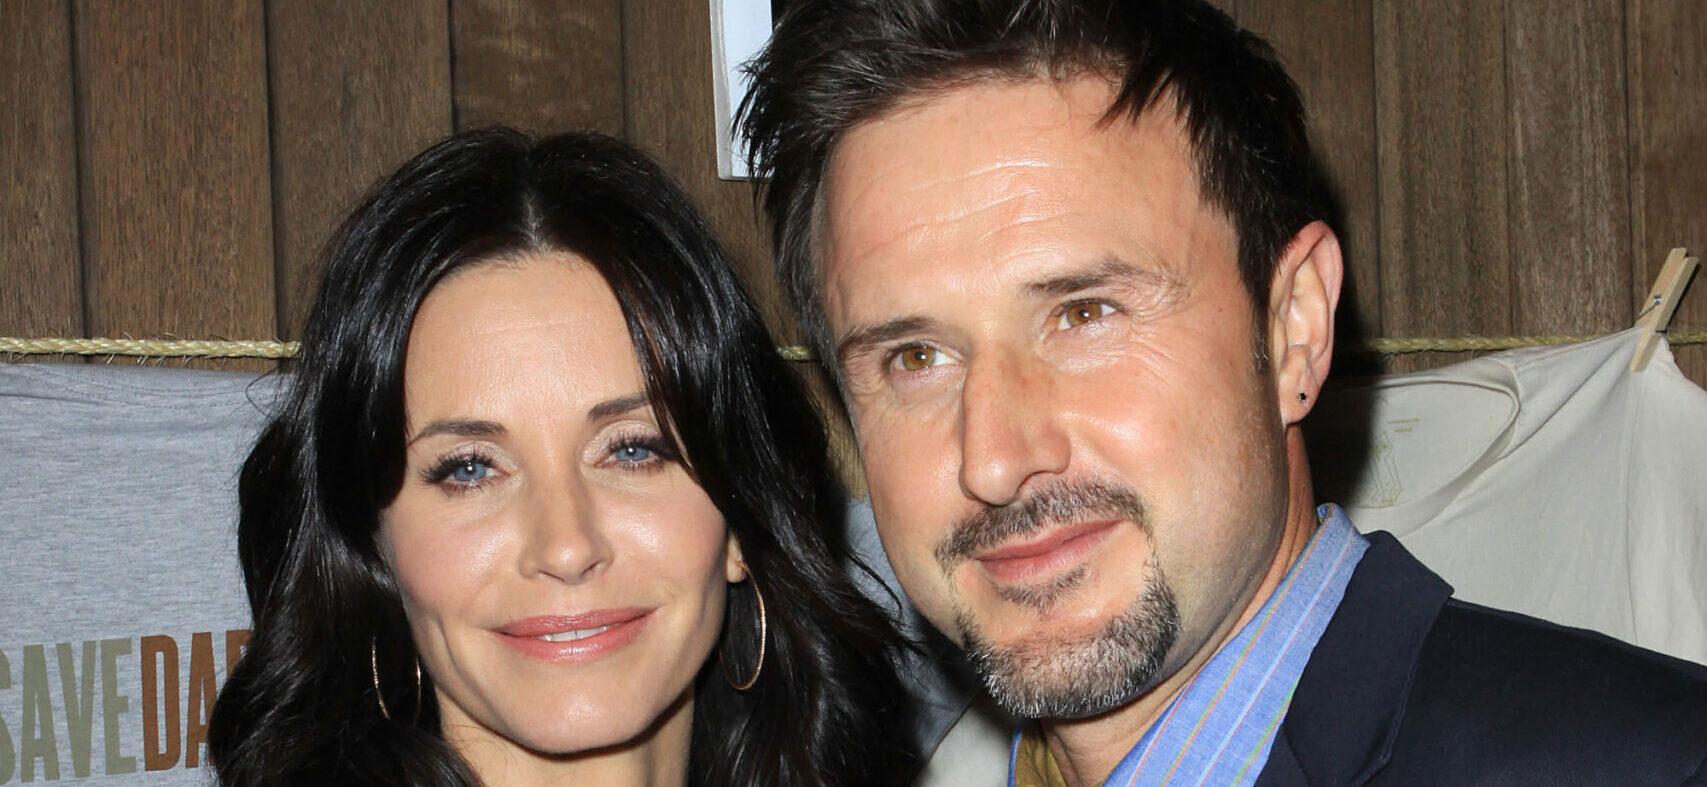 Courteney Cox and David Arquette Official Launch Party for Save Darfur Coalition and Propr held at The Propr Store &amp; Jexy Venice Beach, California - 17.12.09